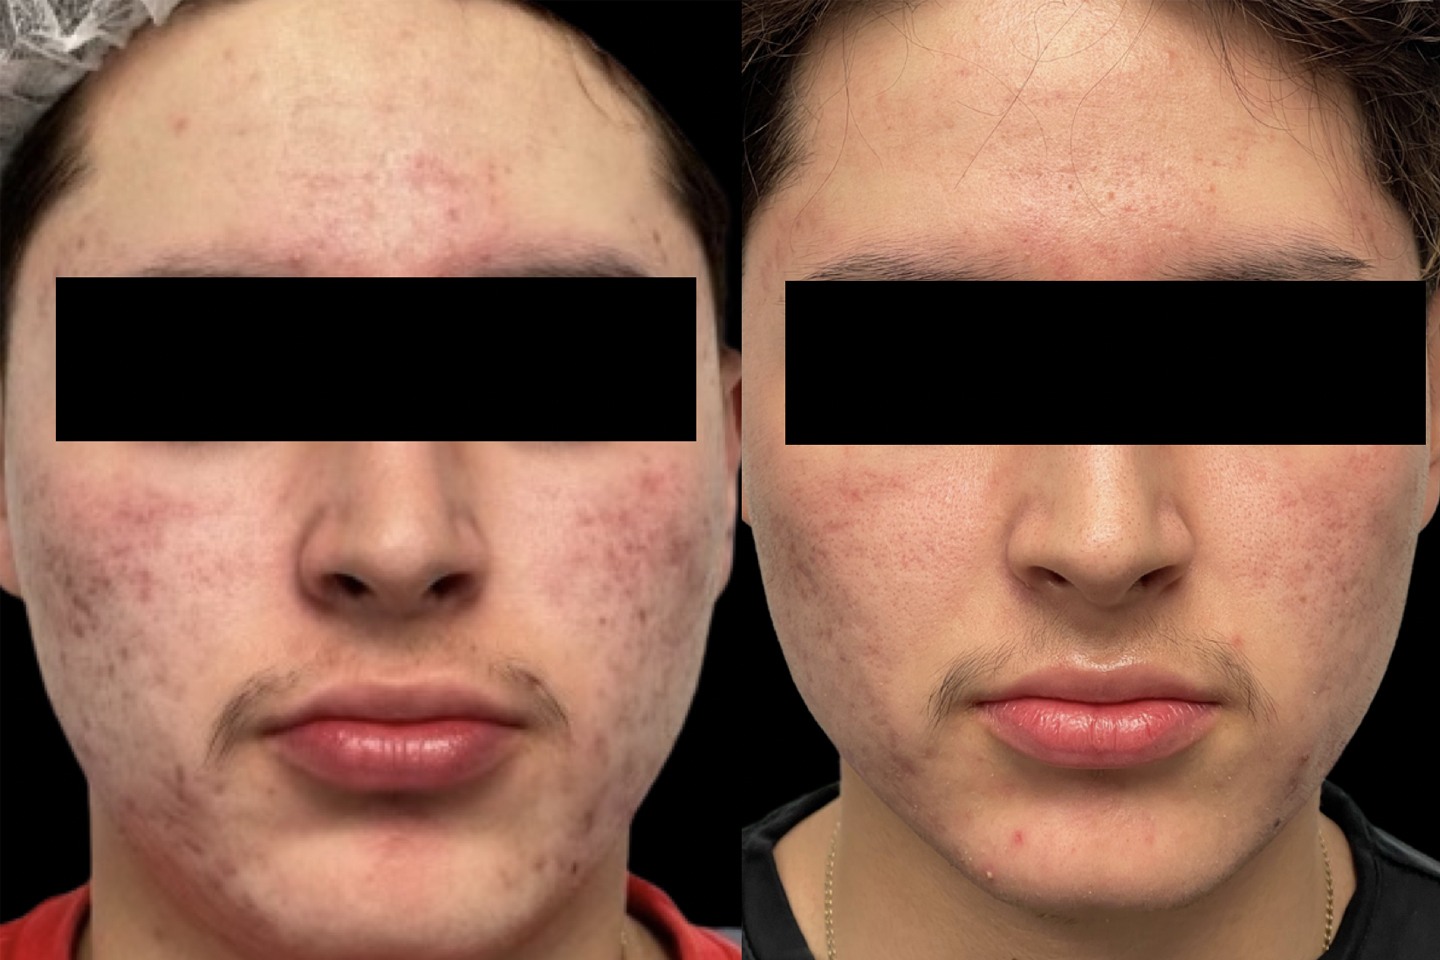 Image of before and 4 weeks post treatment